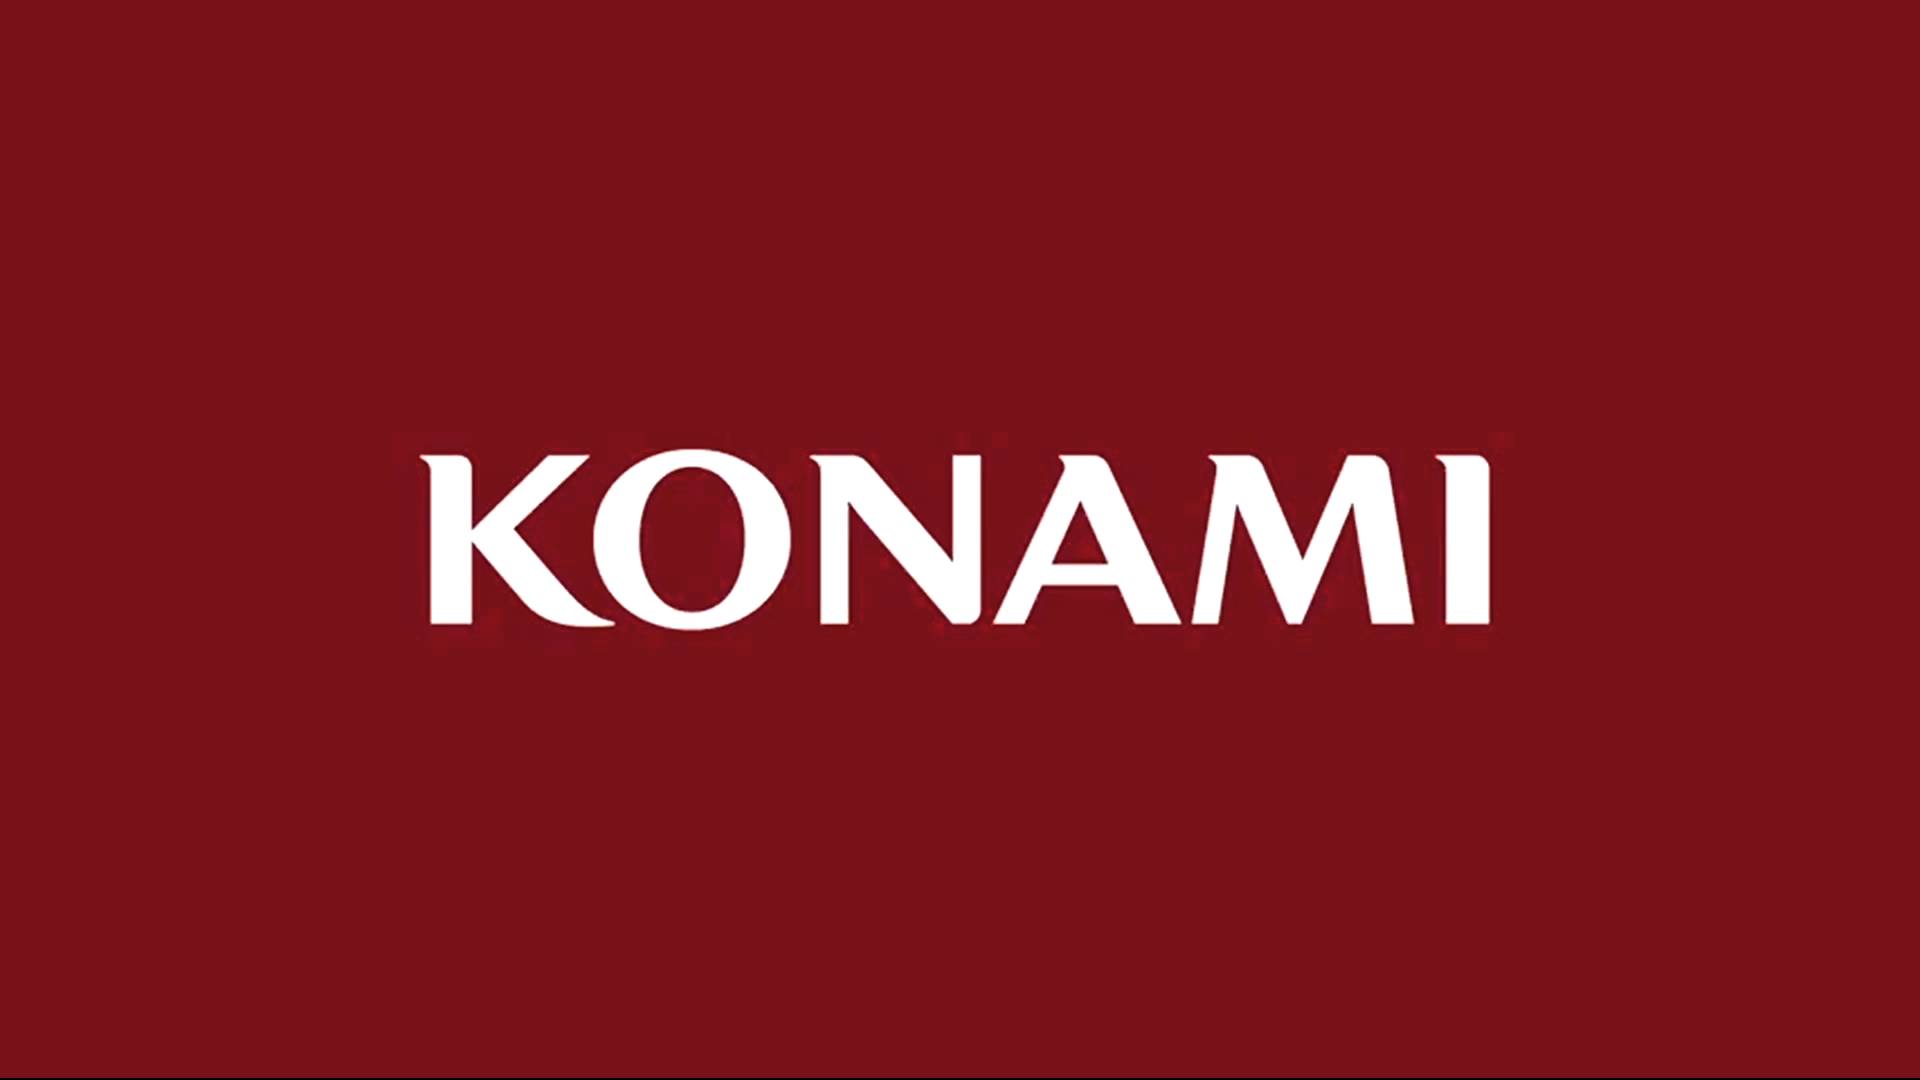 Opinion: Chronicling Konami’s Troubles 2015 - What Is Going on at Konami?